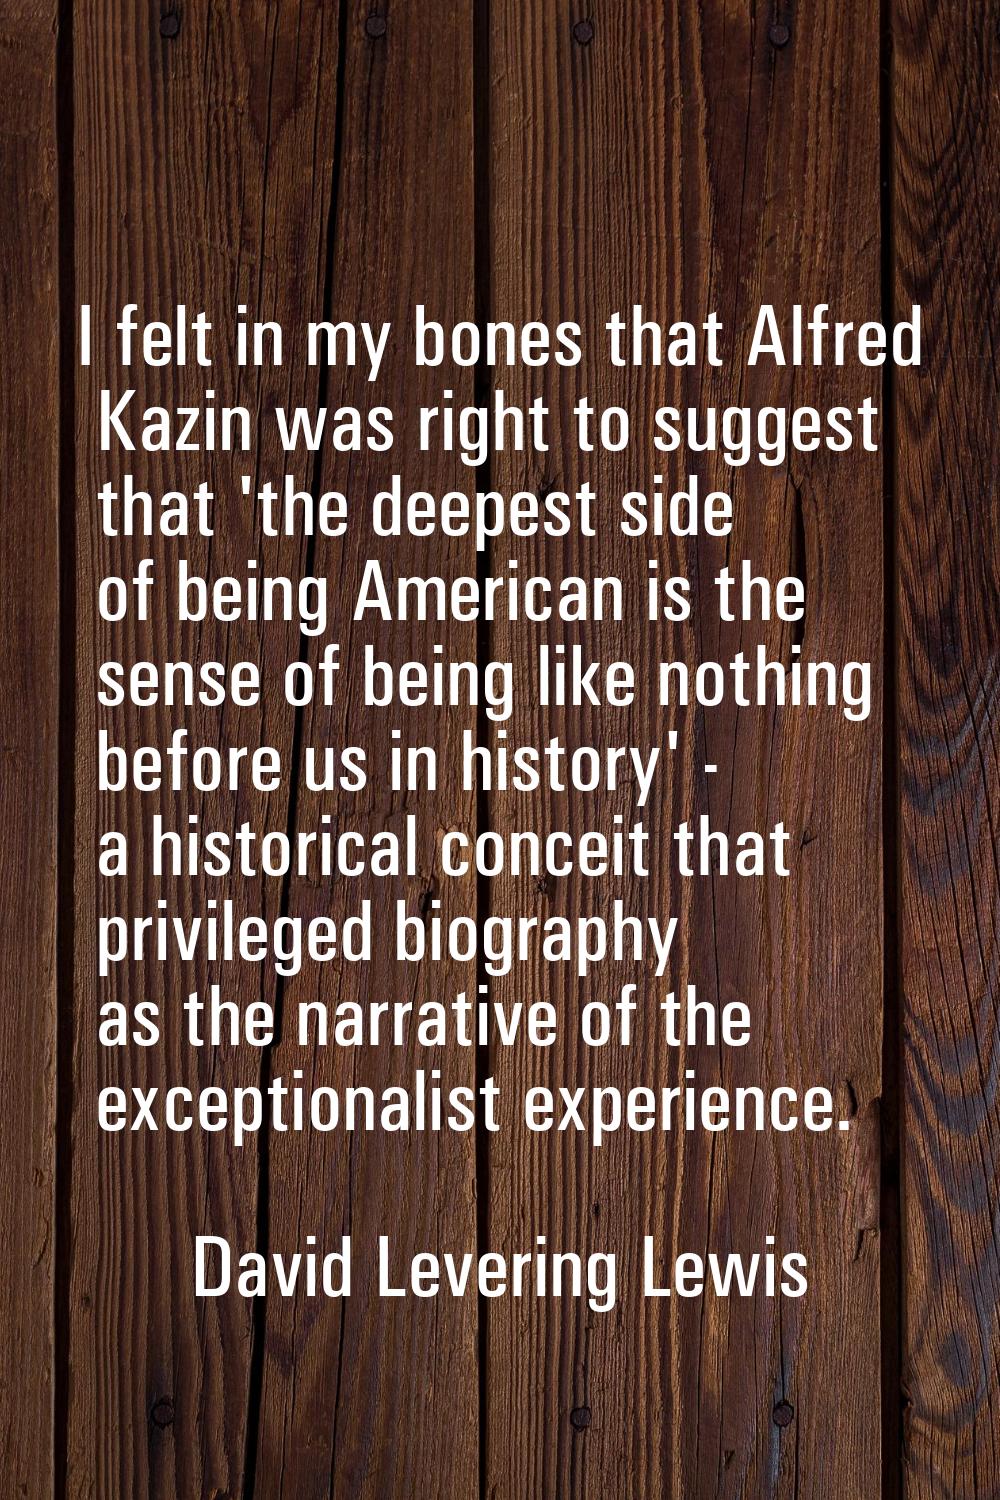 I felt in my bones that Alfred Kazin was right to suggest that 'the deepest side of being American 